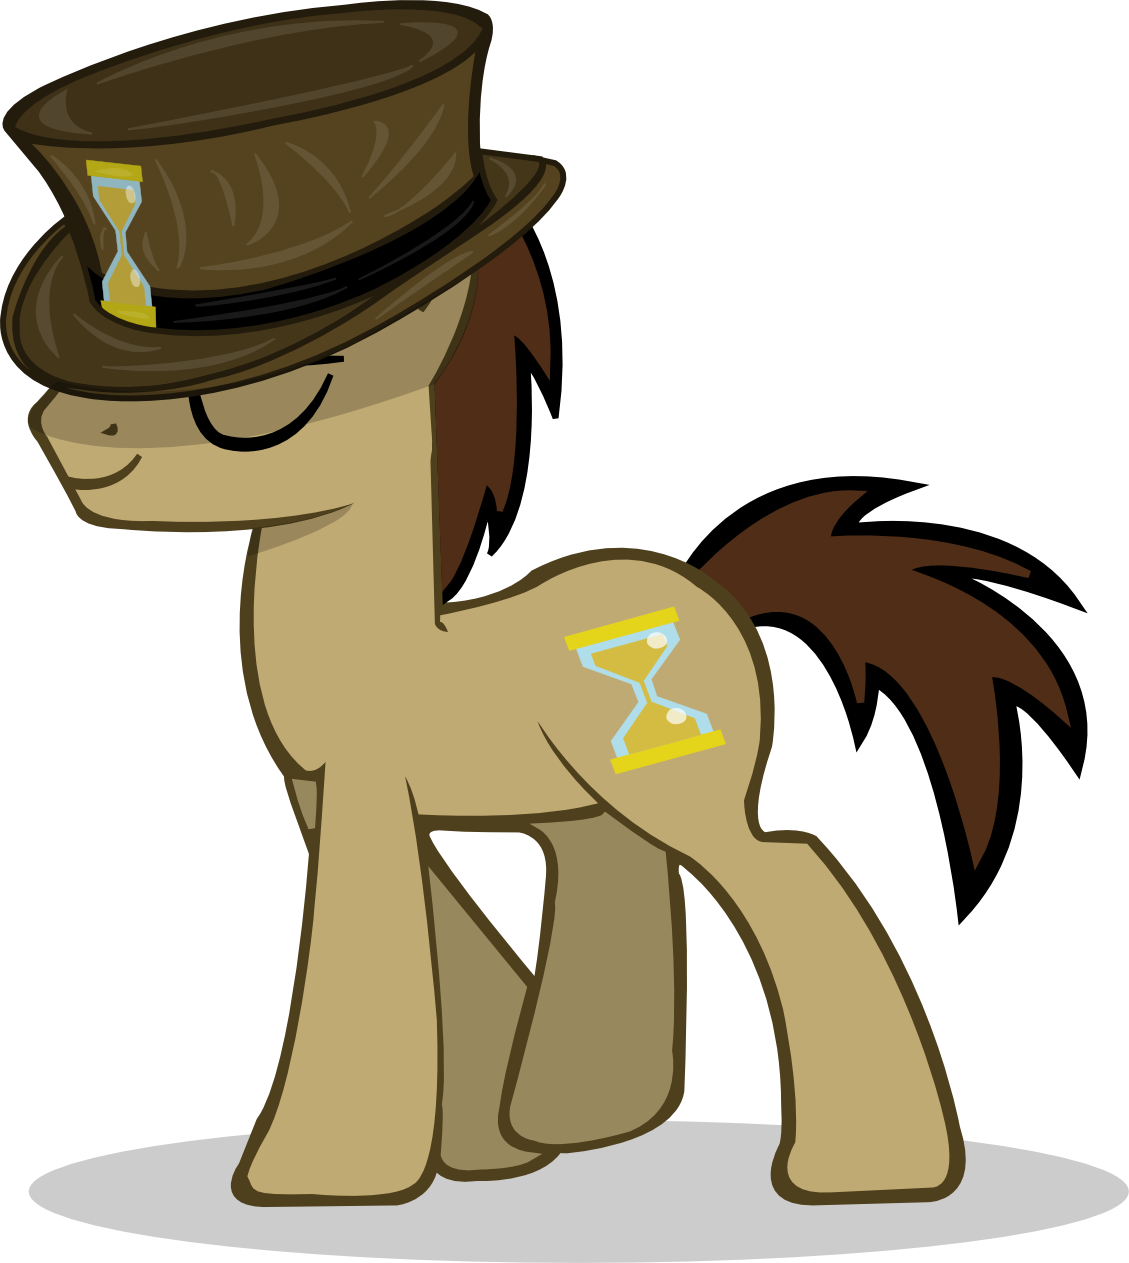 [Obrázek: request_7__doctor_whooves_with_a_hat_by_...6jzy4r.png]